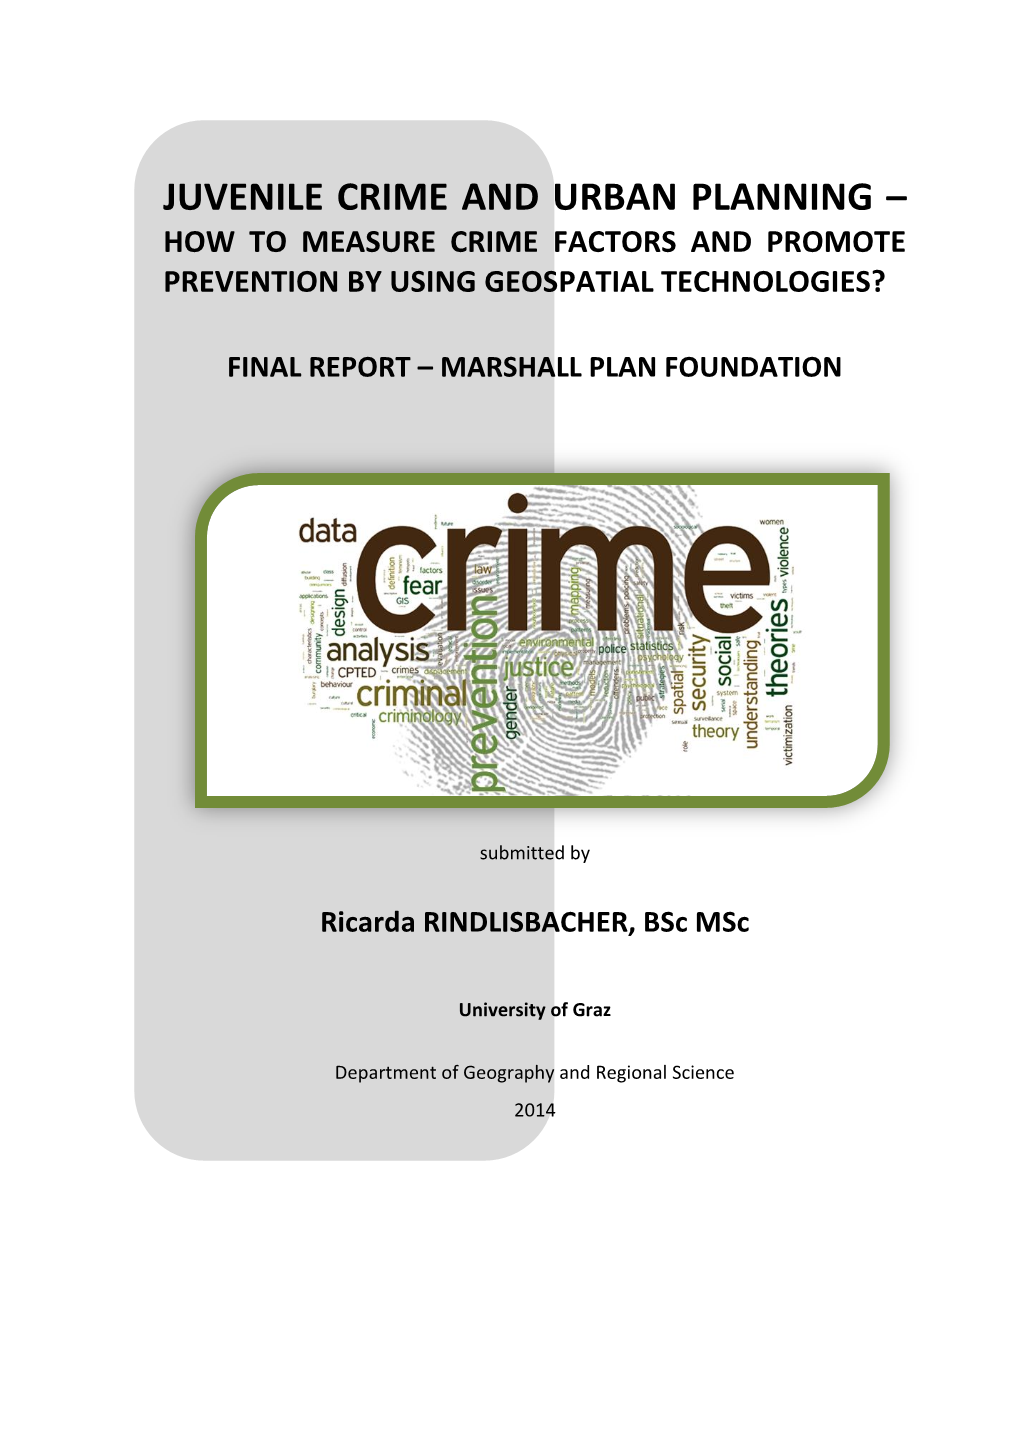 Juvenile Crime and Urban Planning – How to Measure Crime Factors and Promote Prevention by Using Geospatial Technologies?